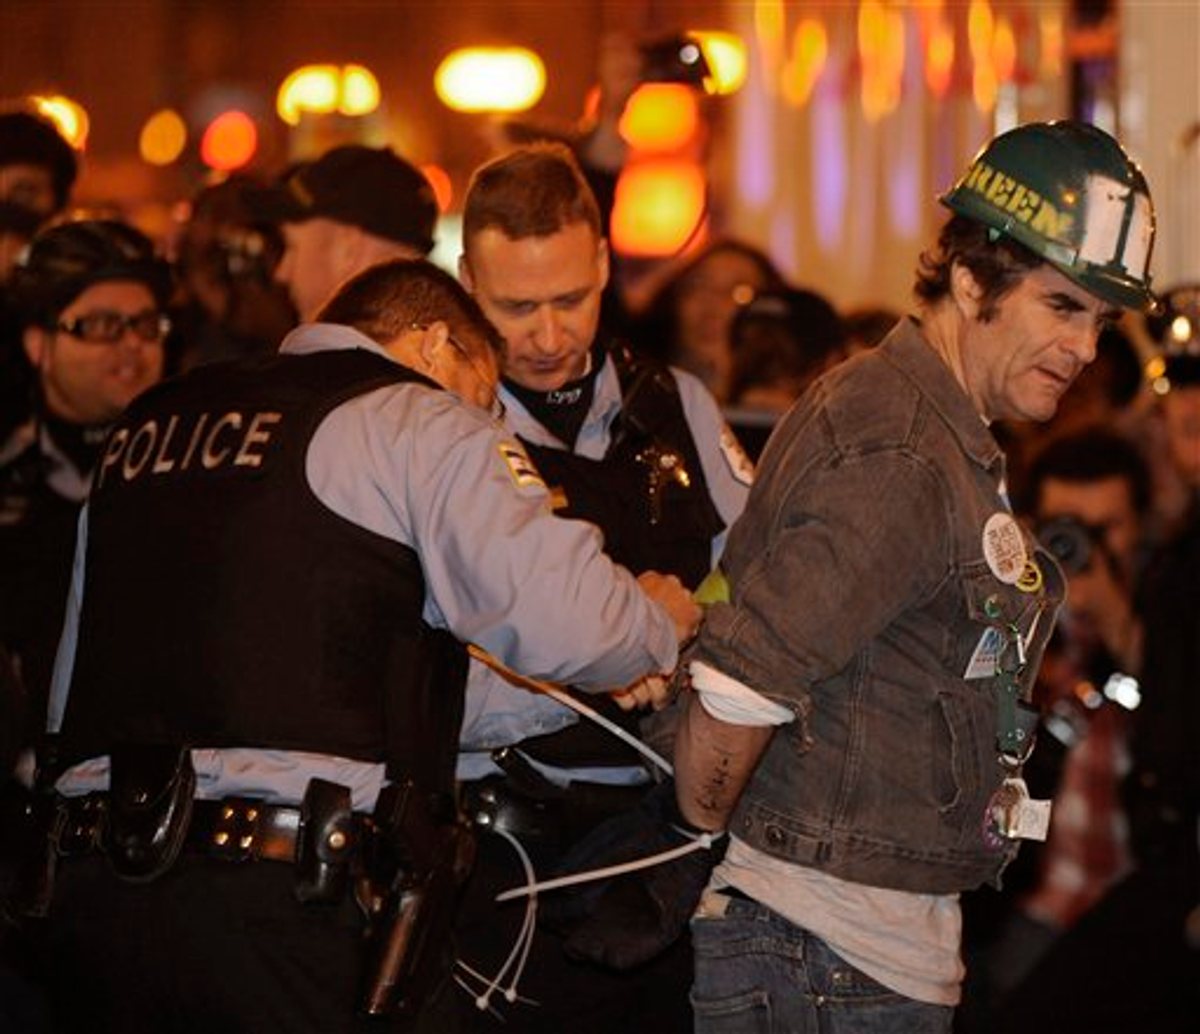 A protester gets arrested during an Occupy Chicago march and protest in Grant Park in Chicago, Sunday, Oct. 23, 2011    (AP Photo/Paul Beaty)